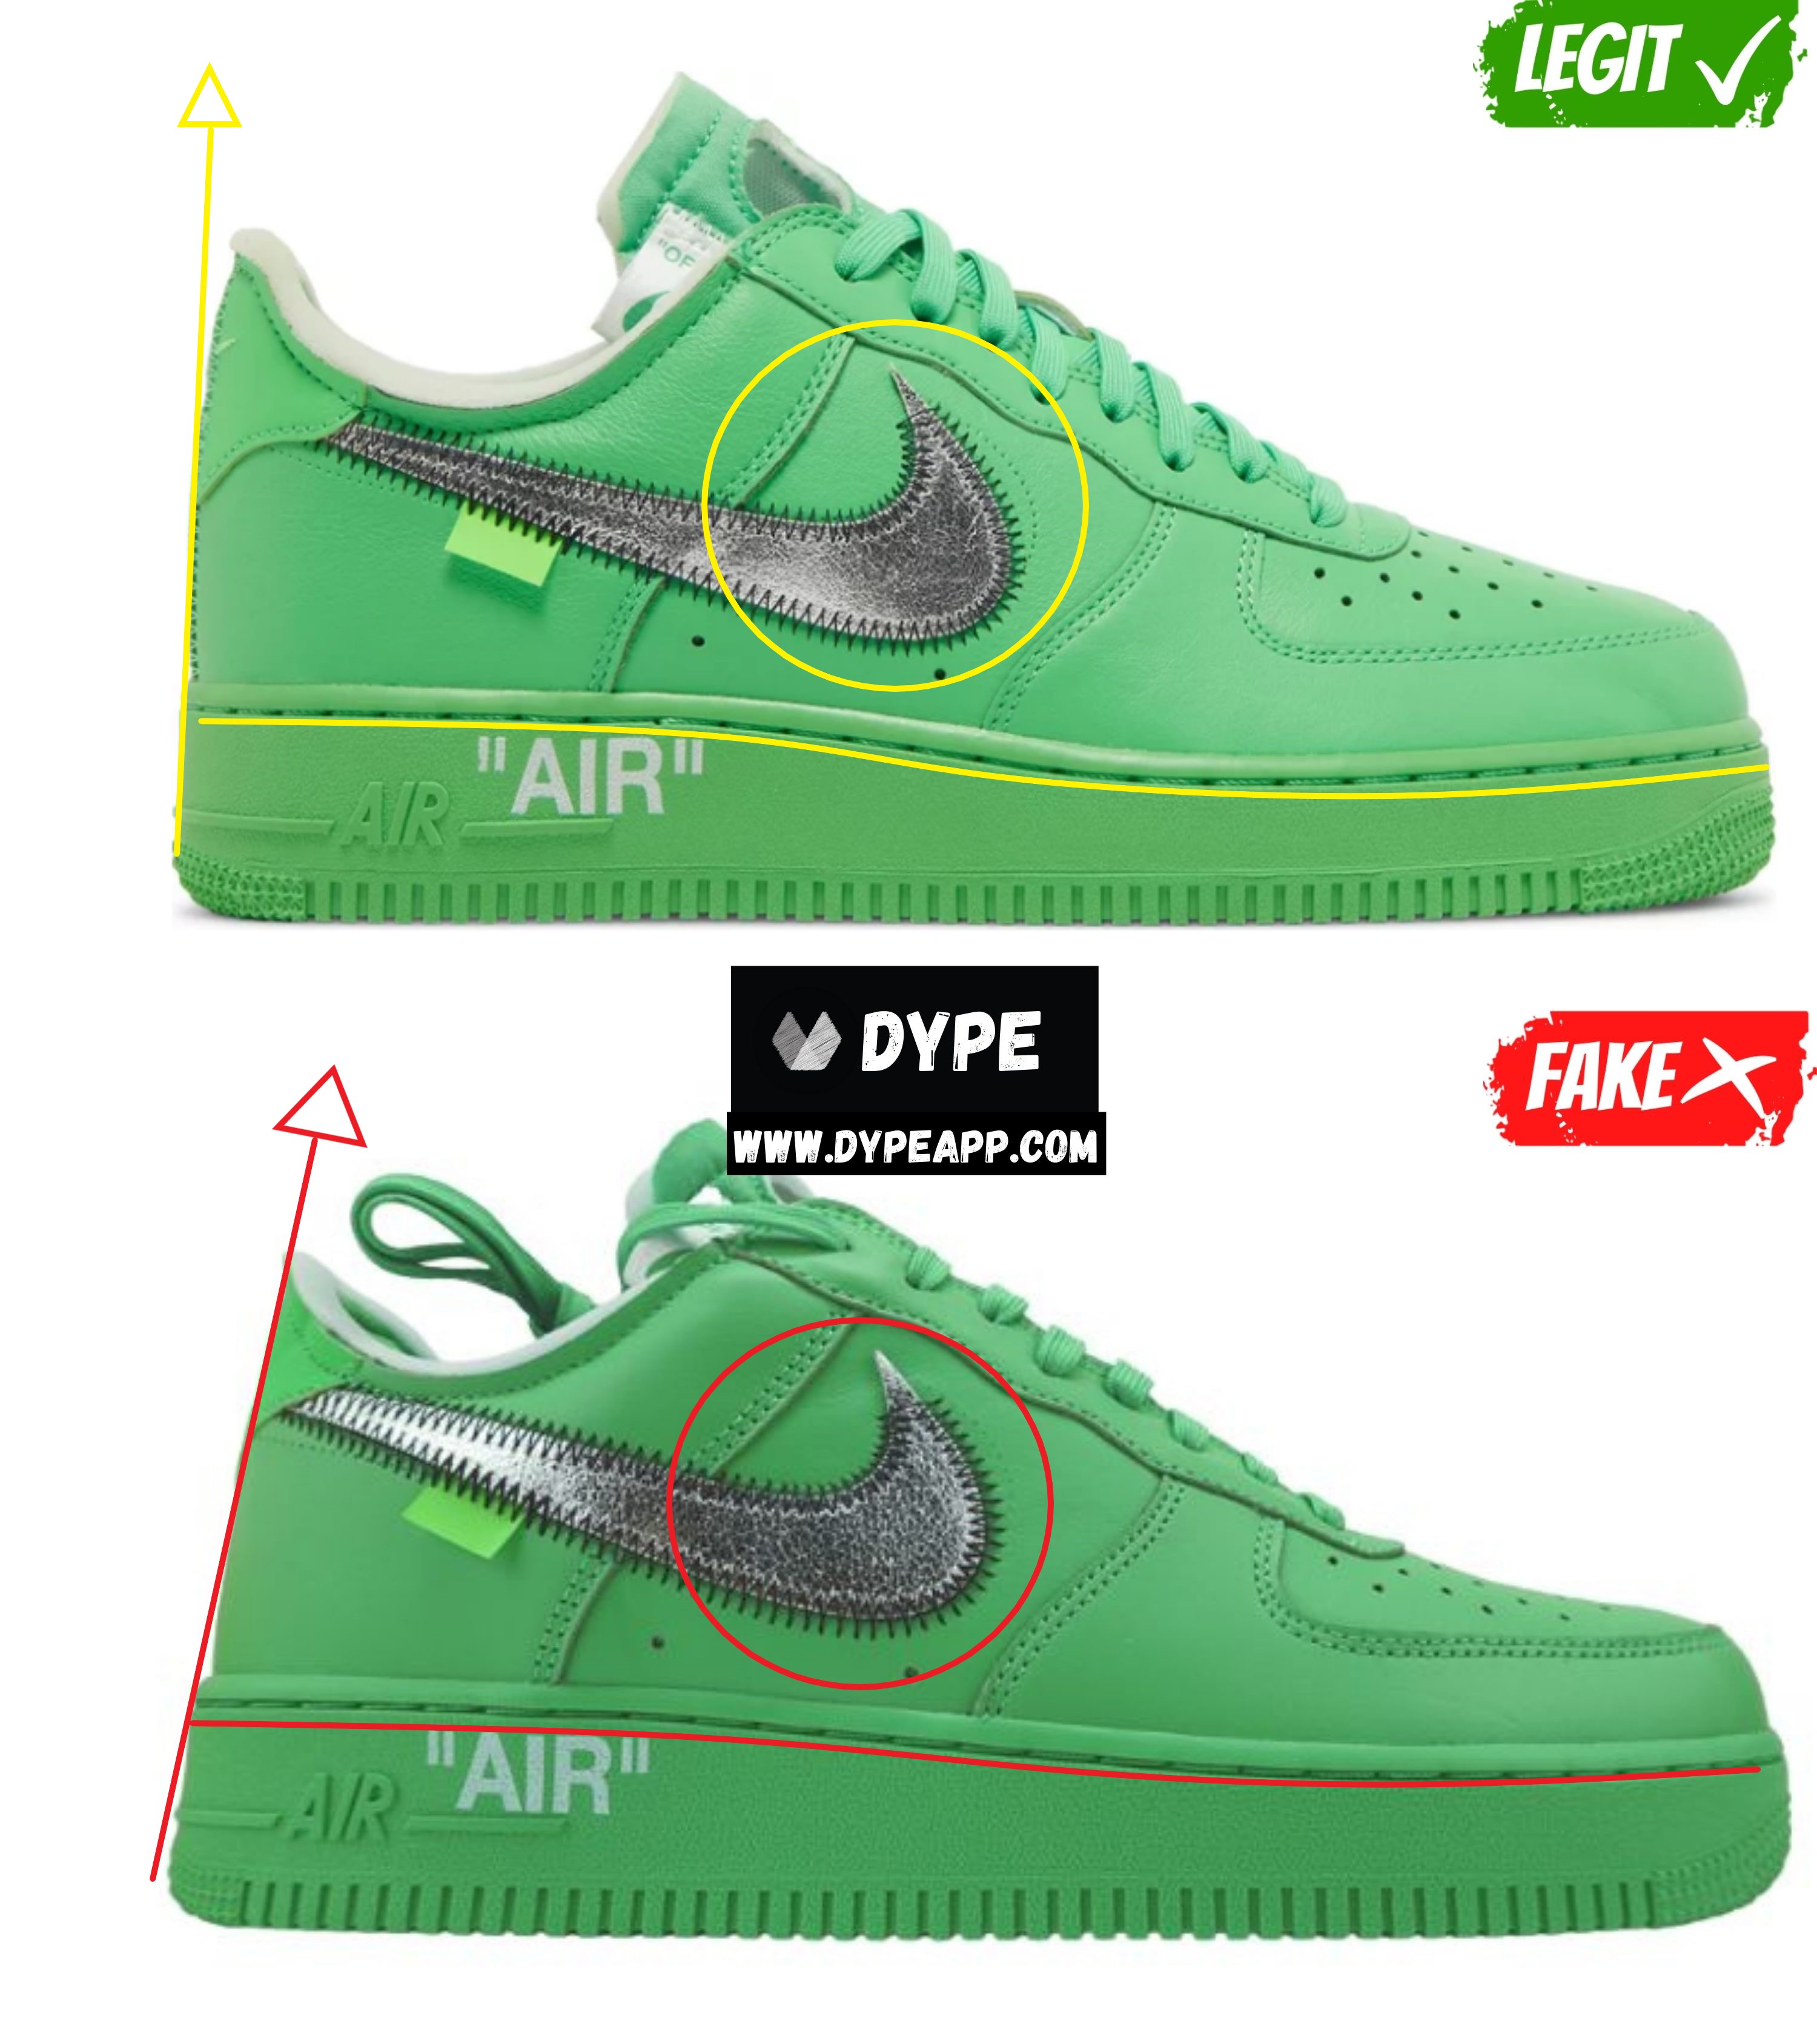 Real vs Good replica Nike Air Force 1. How to spot fake AF 1 07 sneakers 